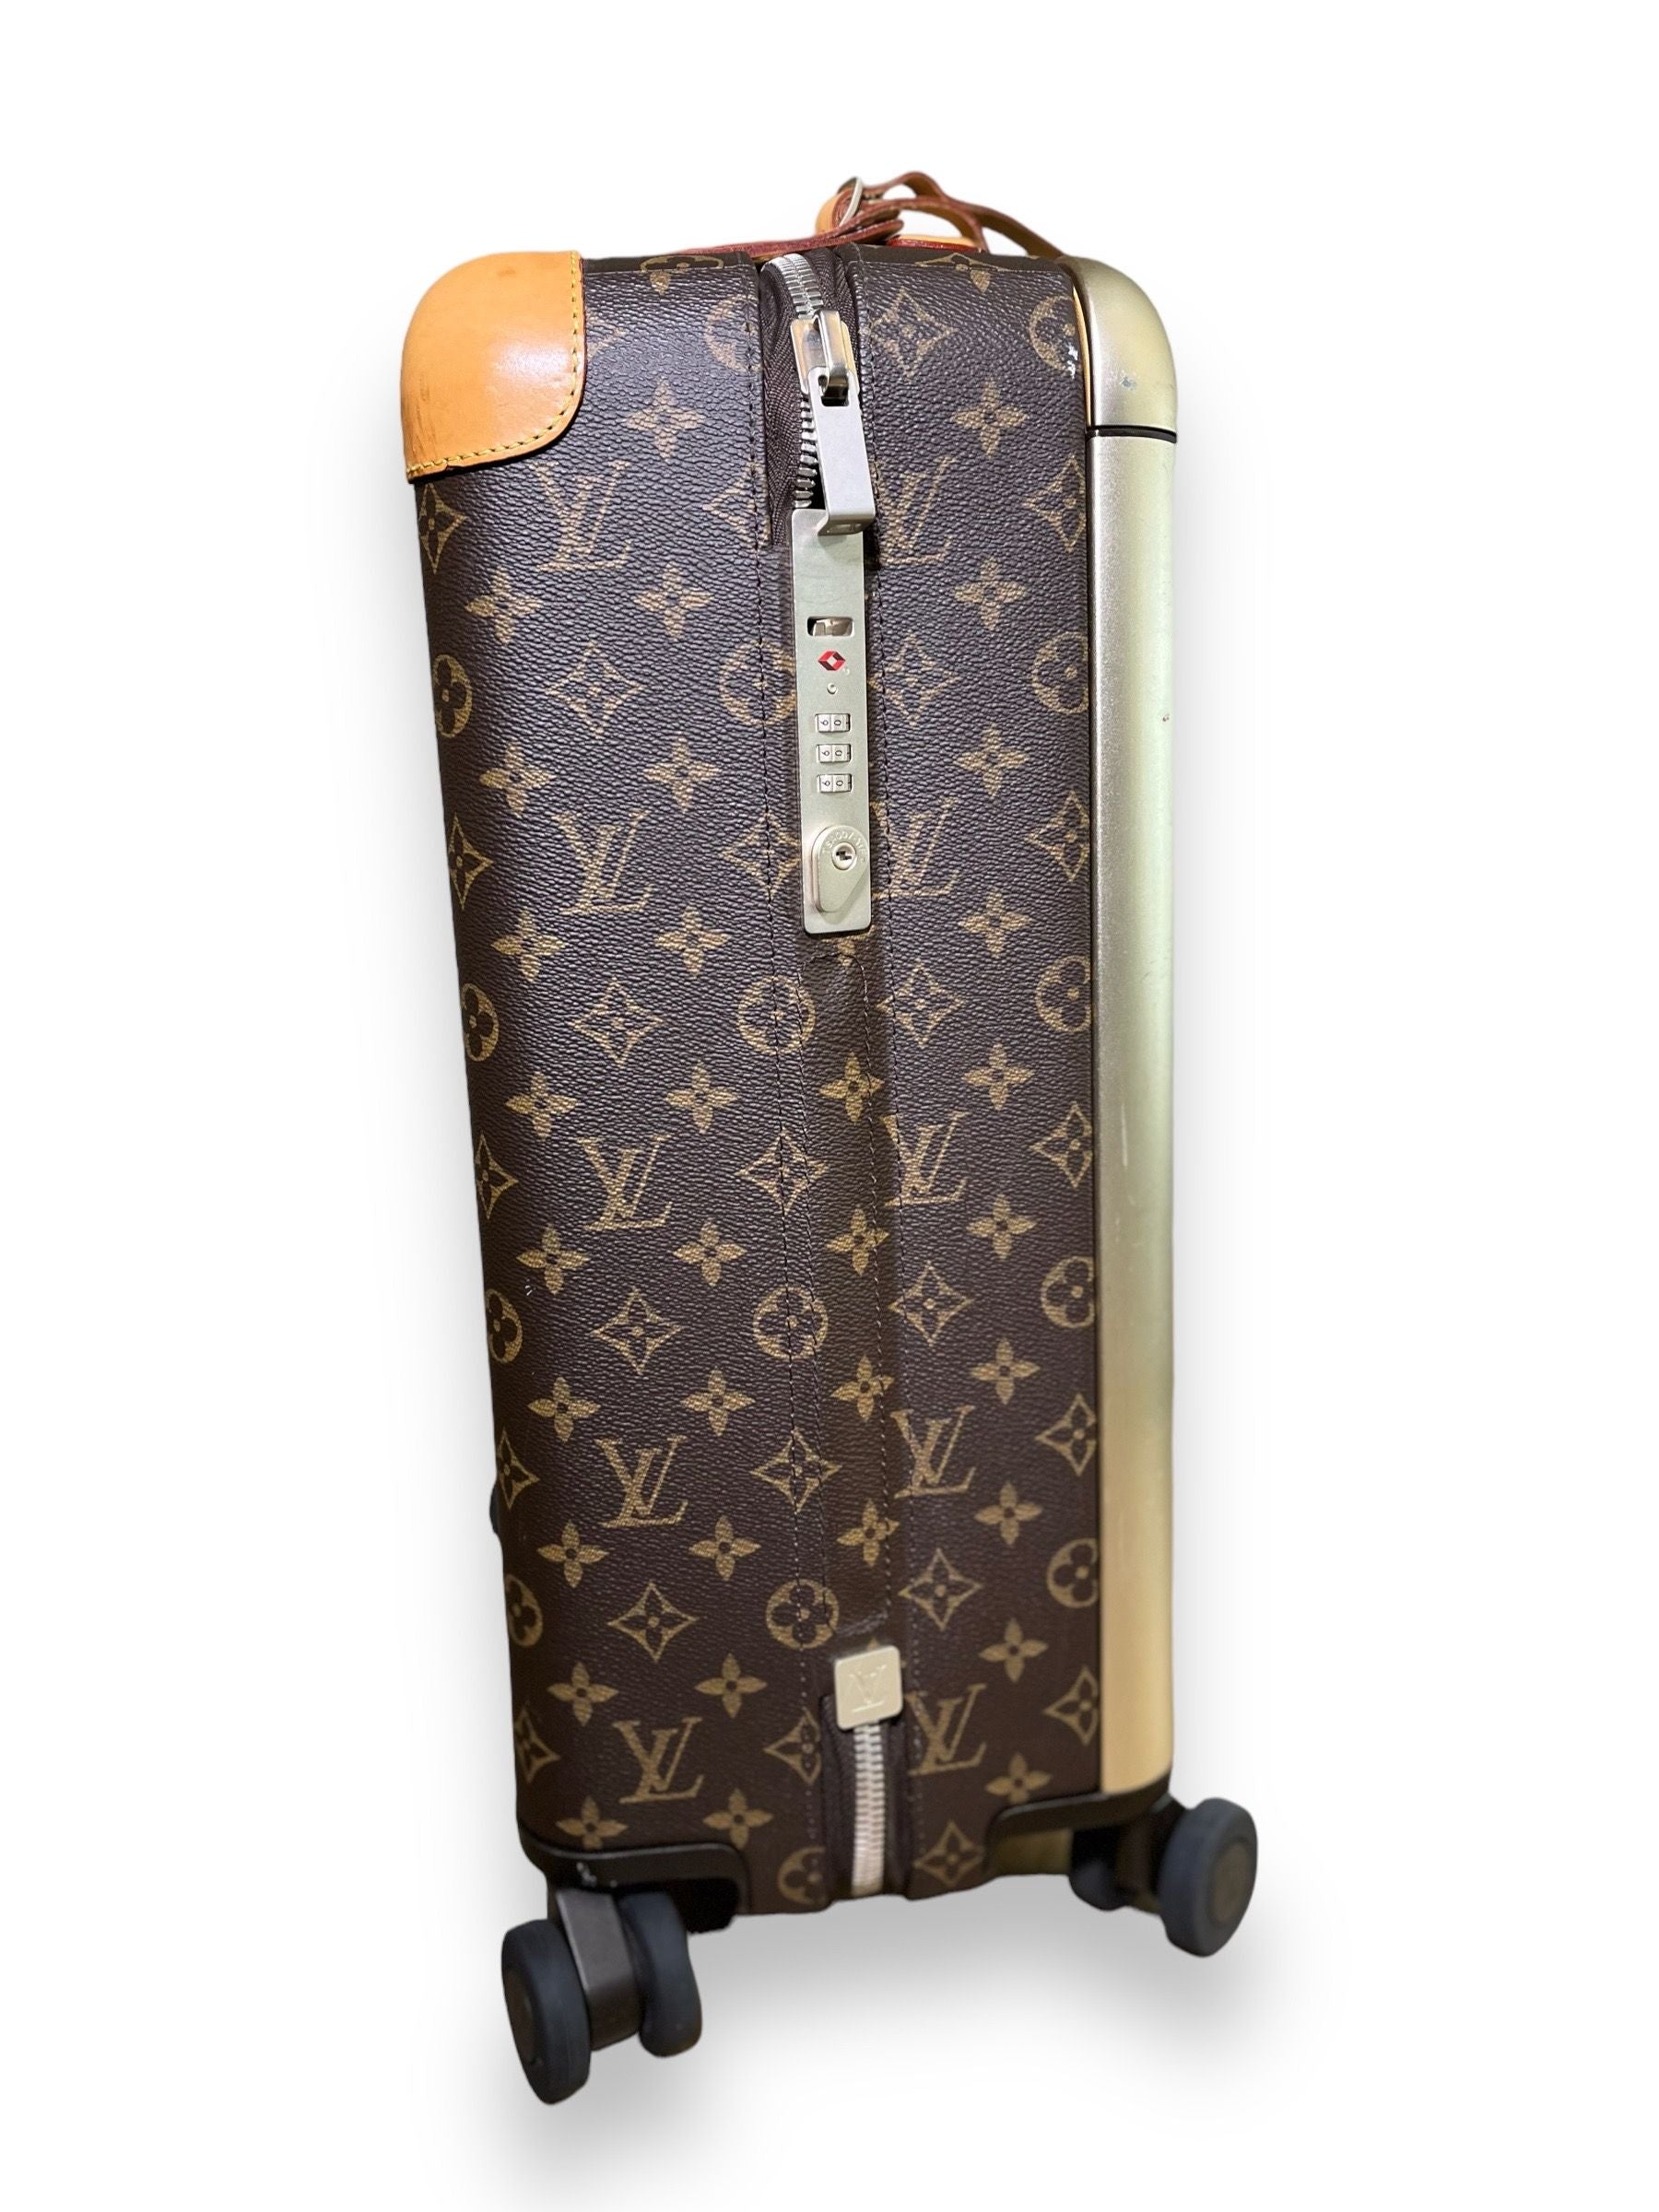 Sold at Auction: AUTHENTIC LOUIS VUITTON HORIZON CARRY ON BAG / LUGGAGE